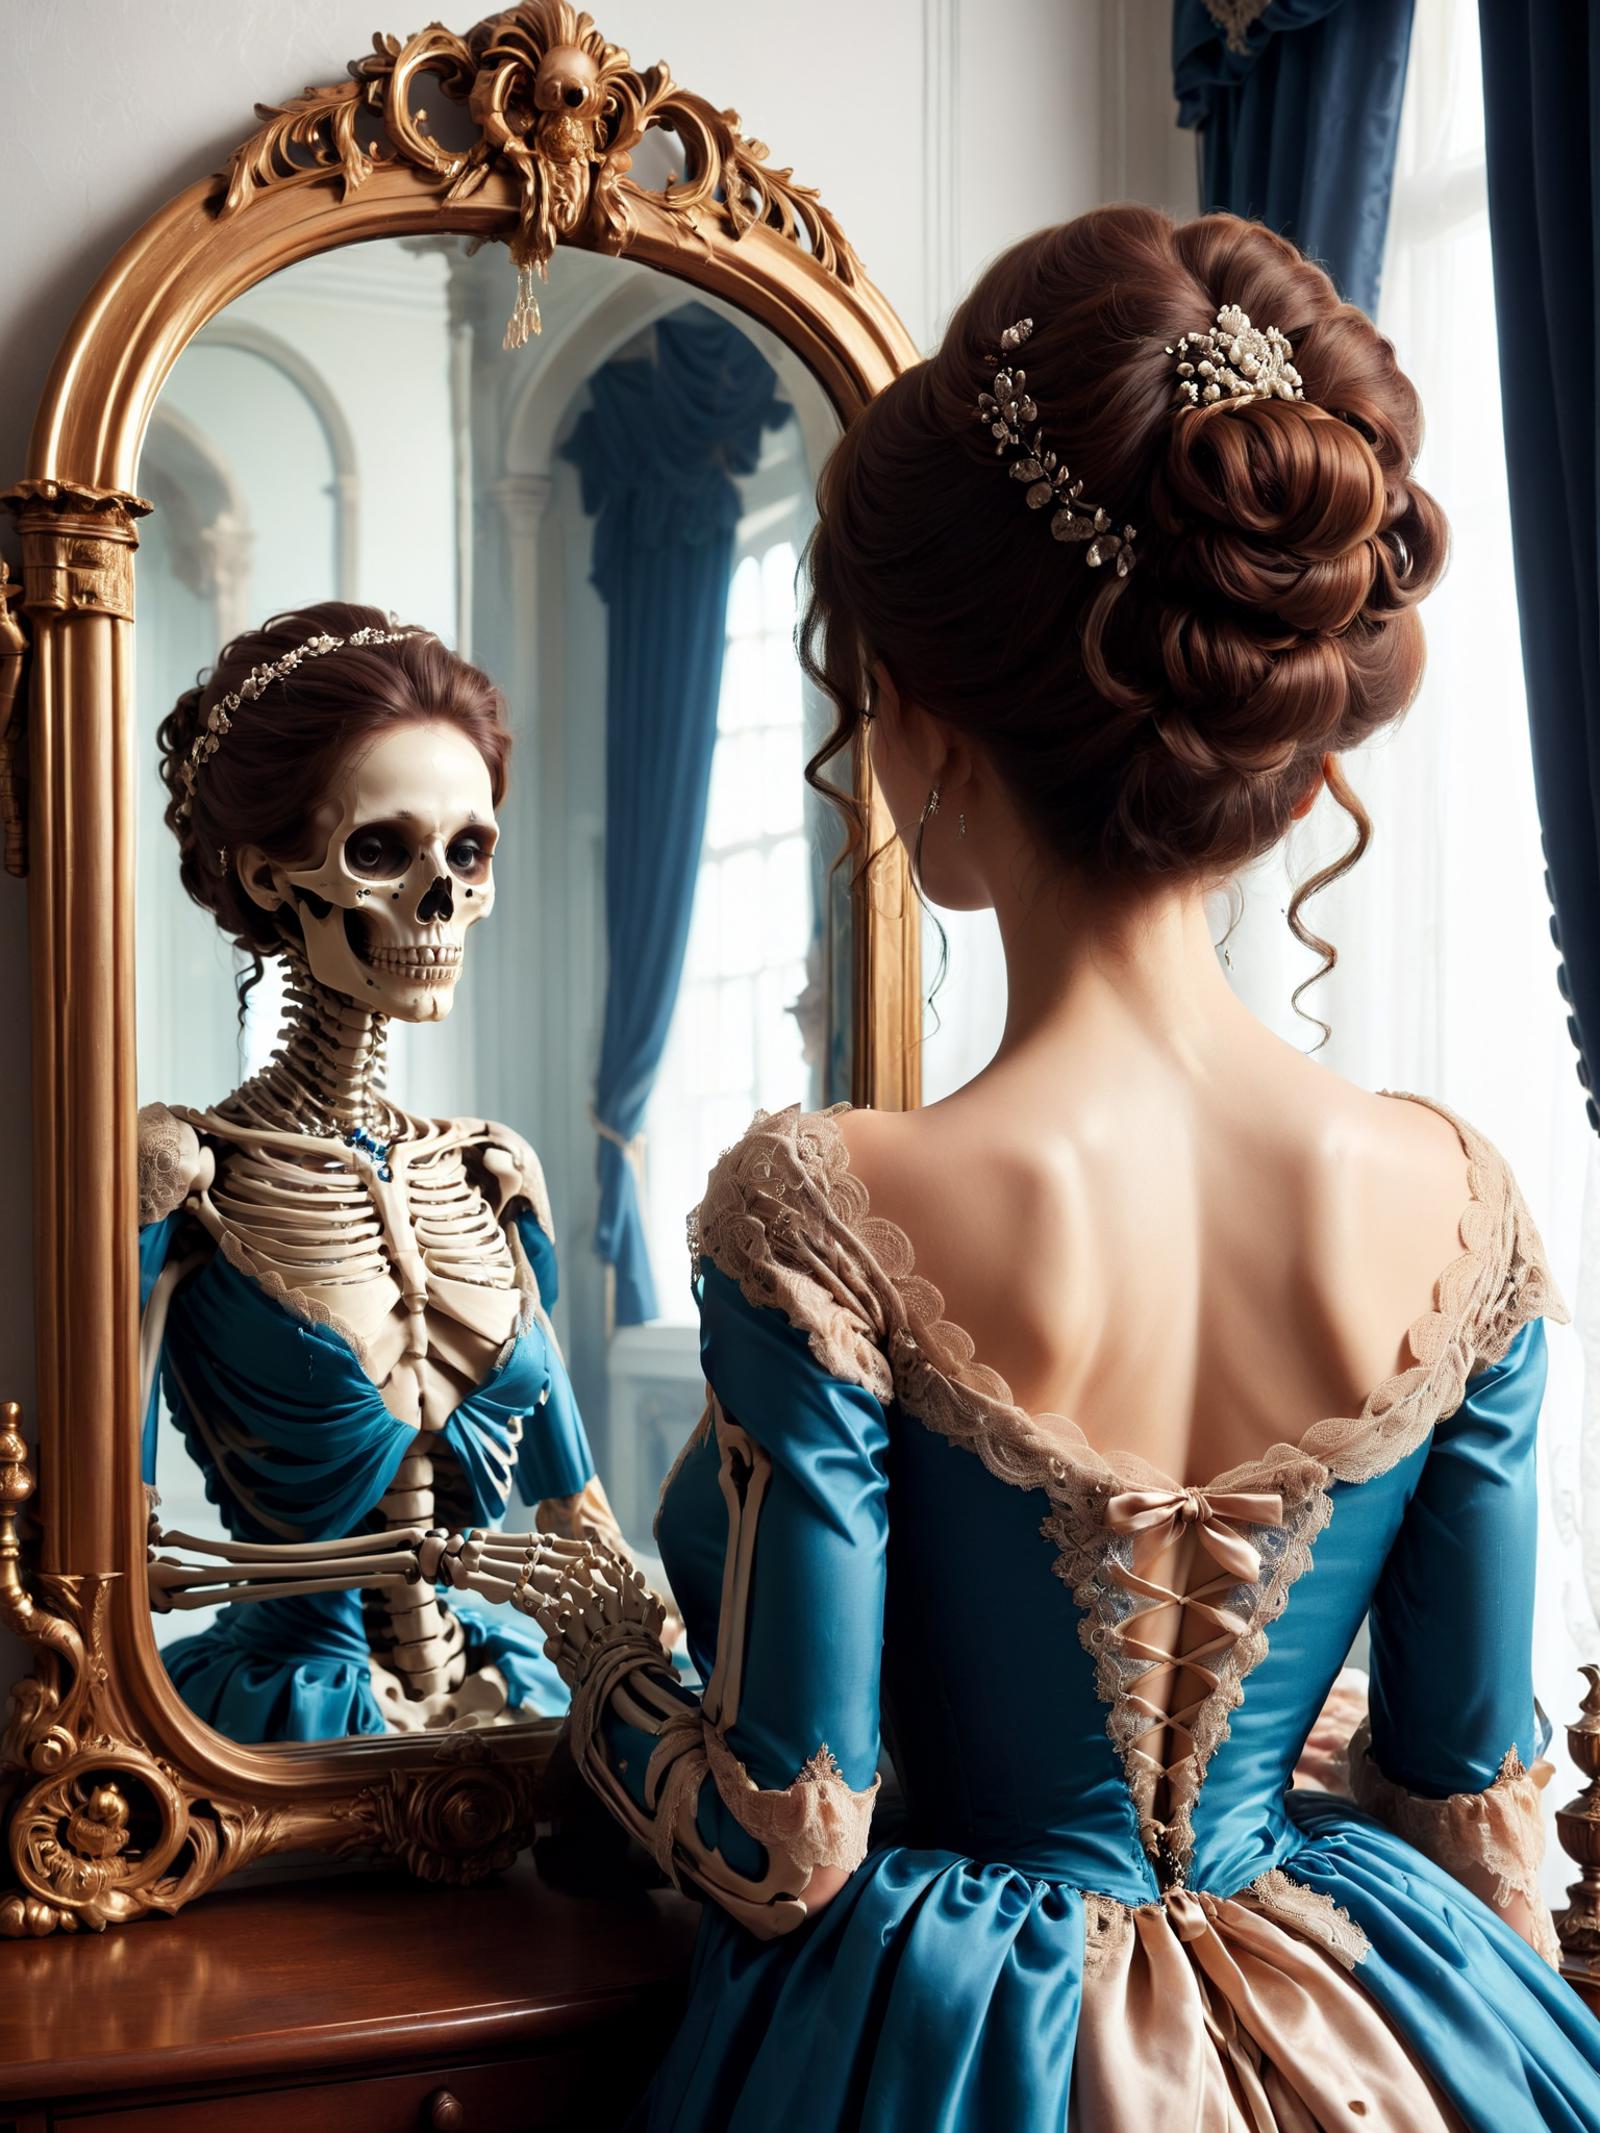 A woman looking at her reflection in a mirror, with a skeleton behind her.